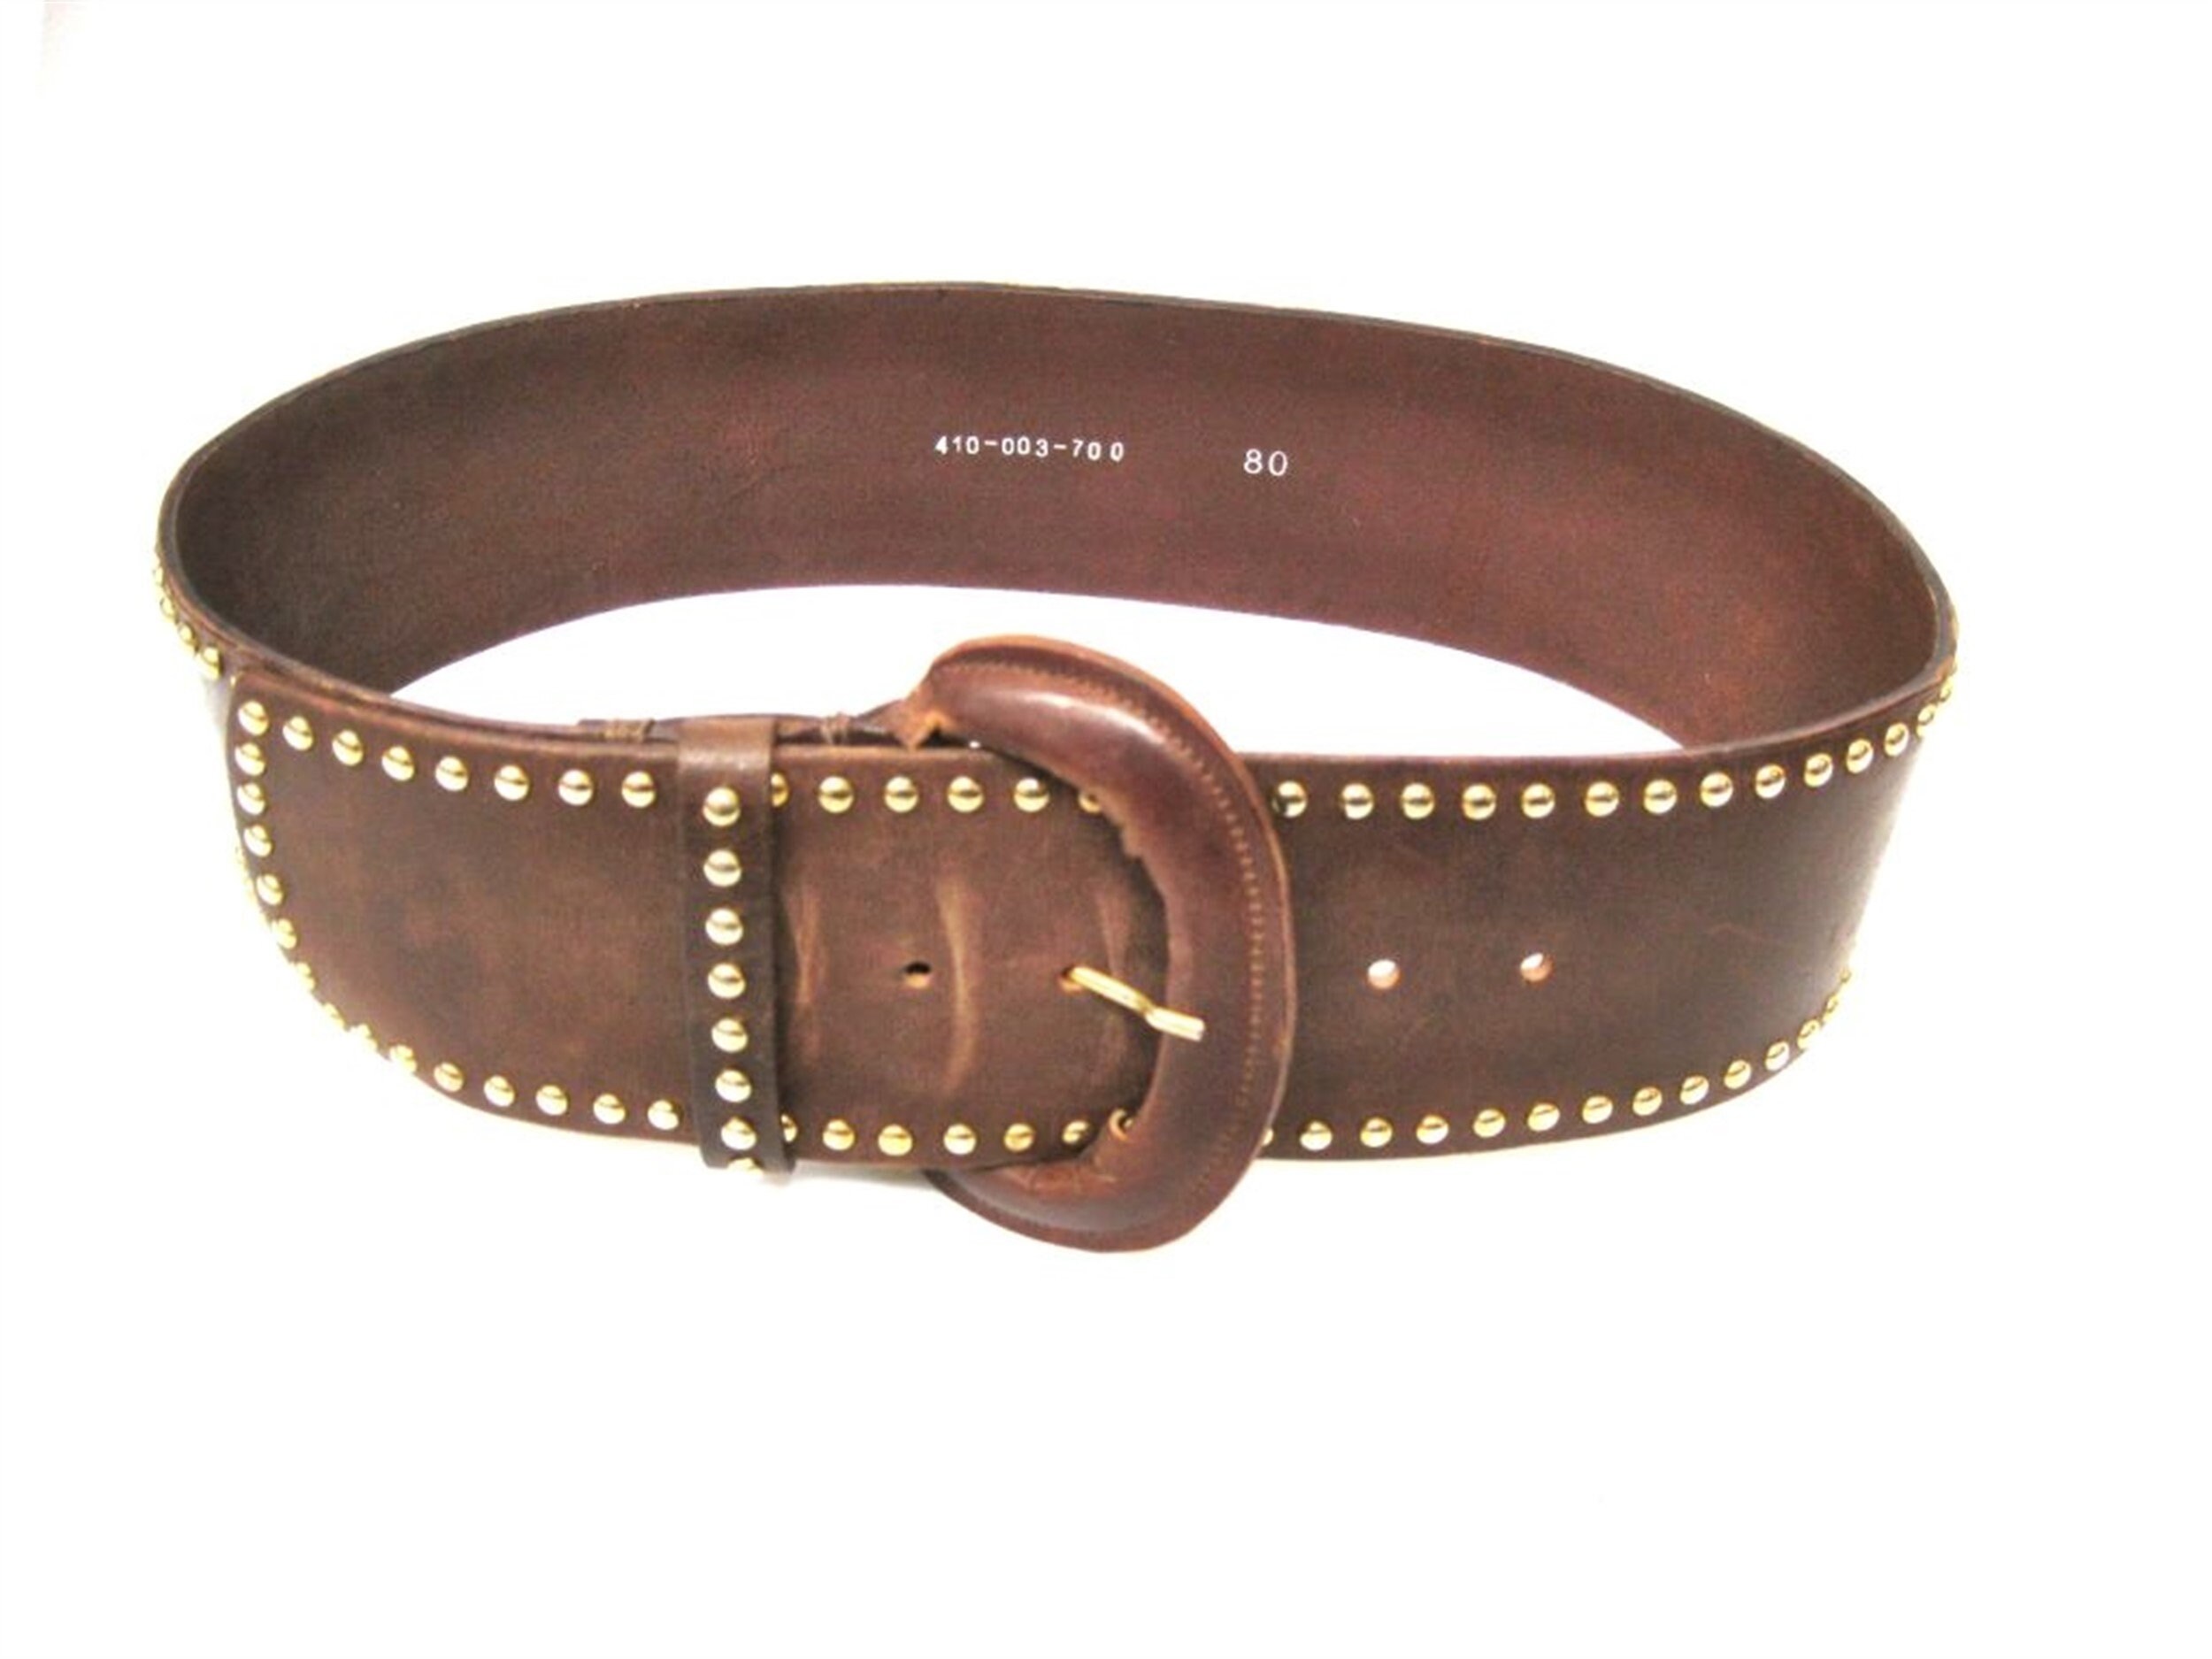 Vintage Woman / Teen Genuine Leather Belt High Quality Leather - Etsy